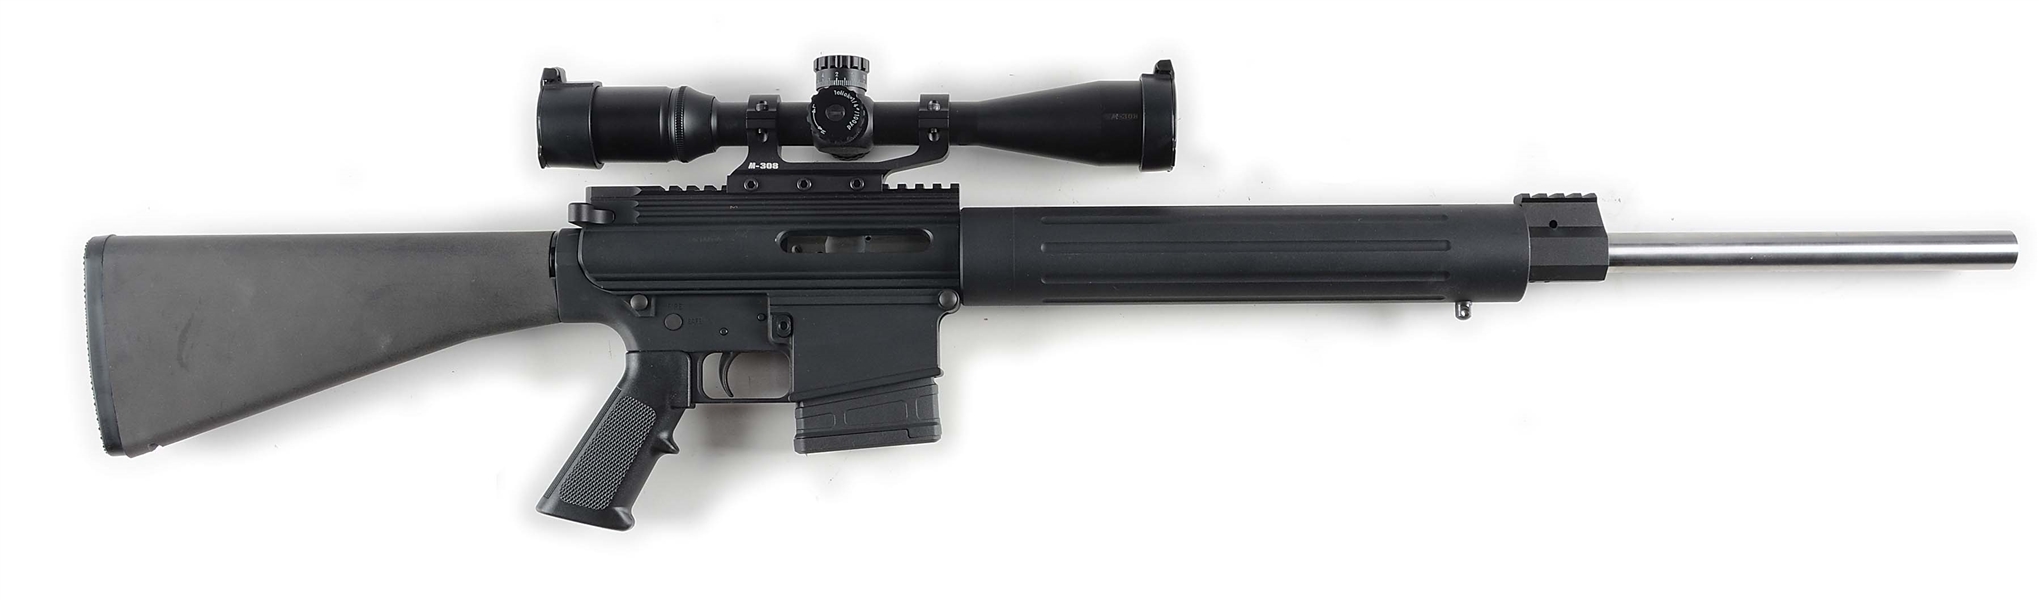 (M) DPMS PANTHER ARMS LR-308 SEMI-AUTOMATIC RIFLE WITH NIKON SCOPE.